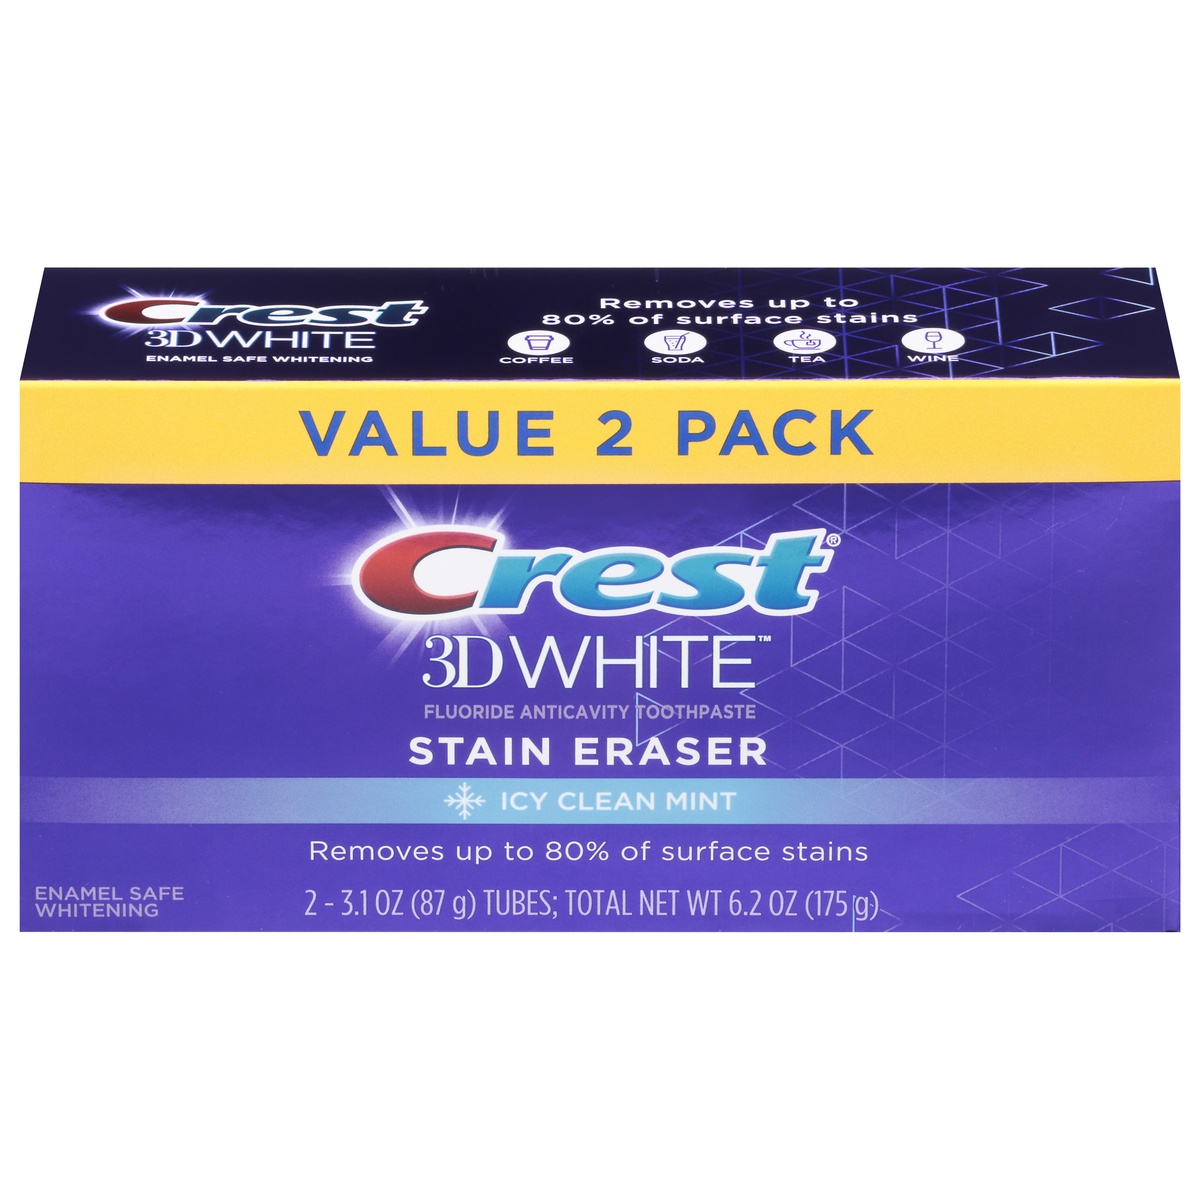 slide 1 of 10, Crest 3D White Stain Eraser Icy Clean Mint Toothpaste Value 2 Pack 2 - 3.1 oz Tubes, 6.1 oz